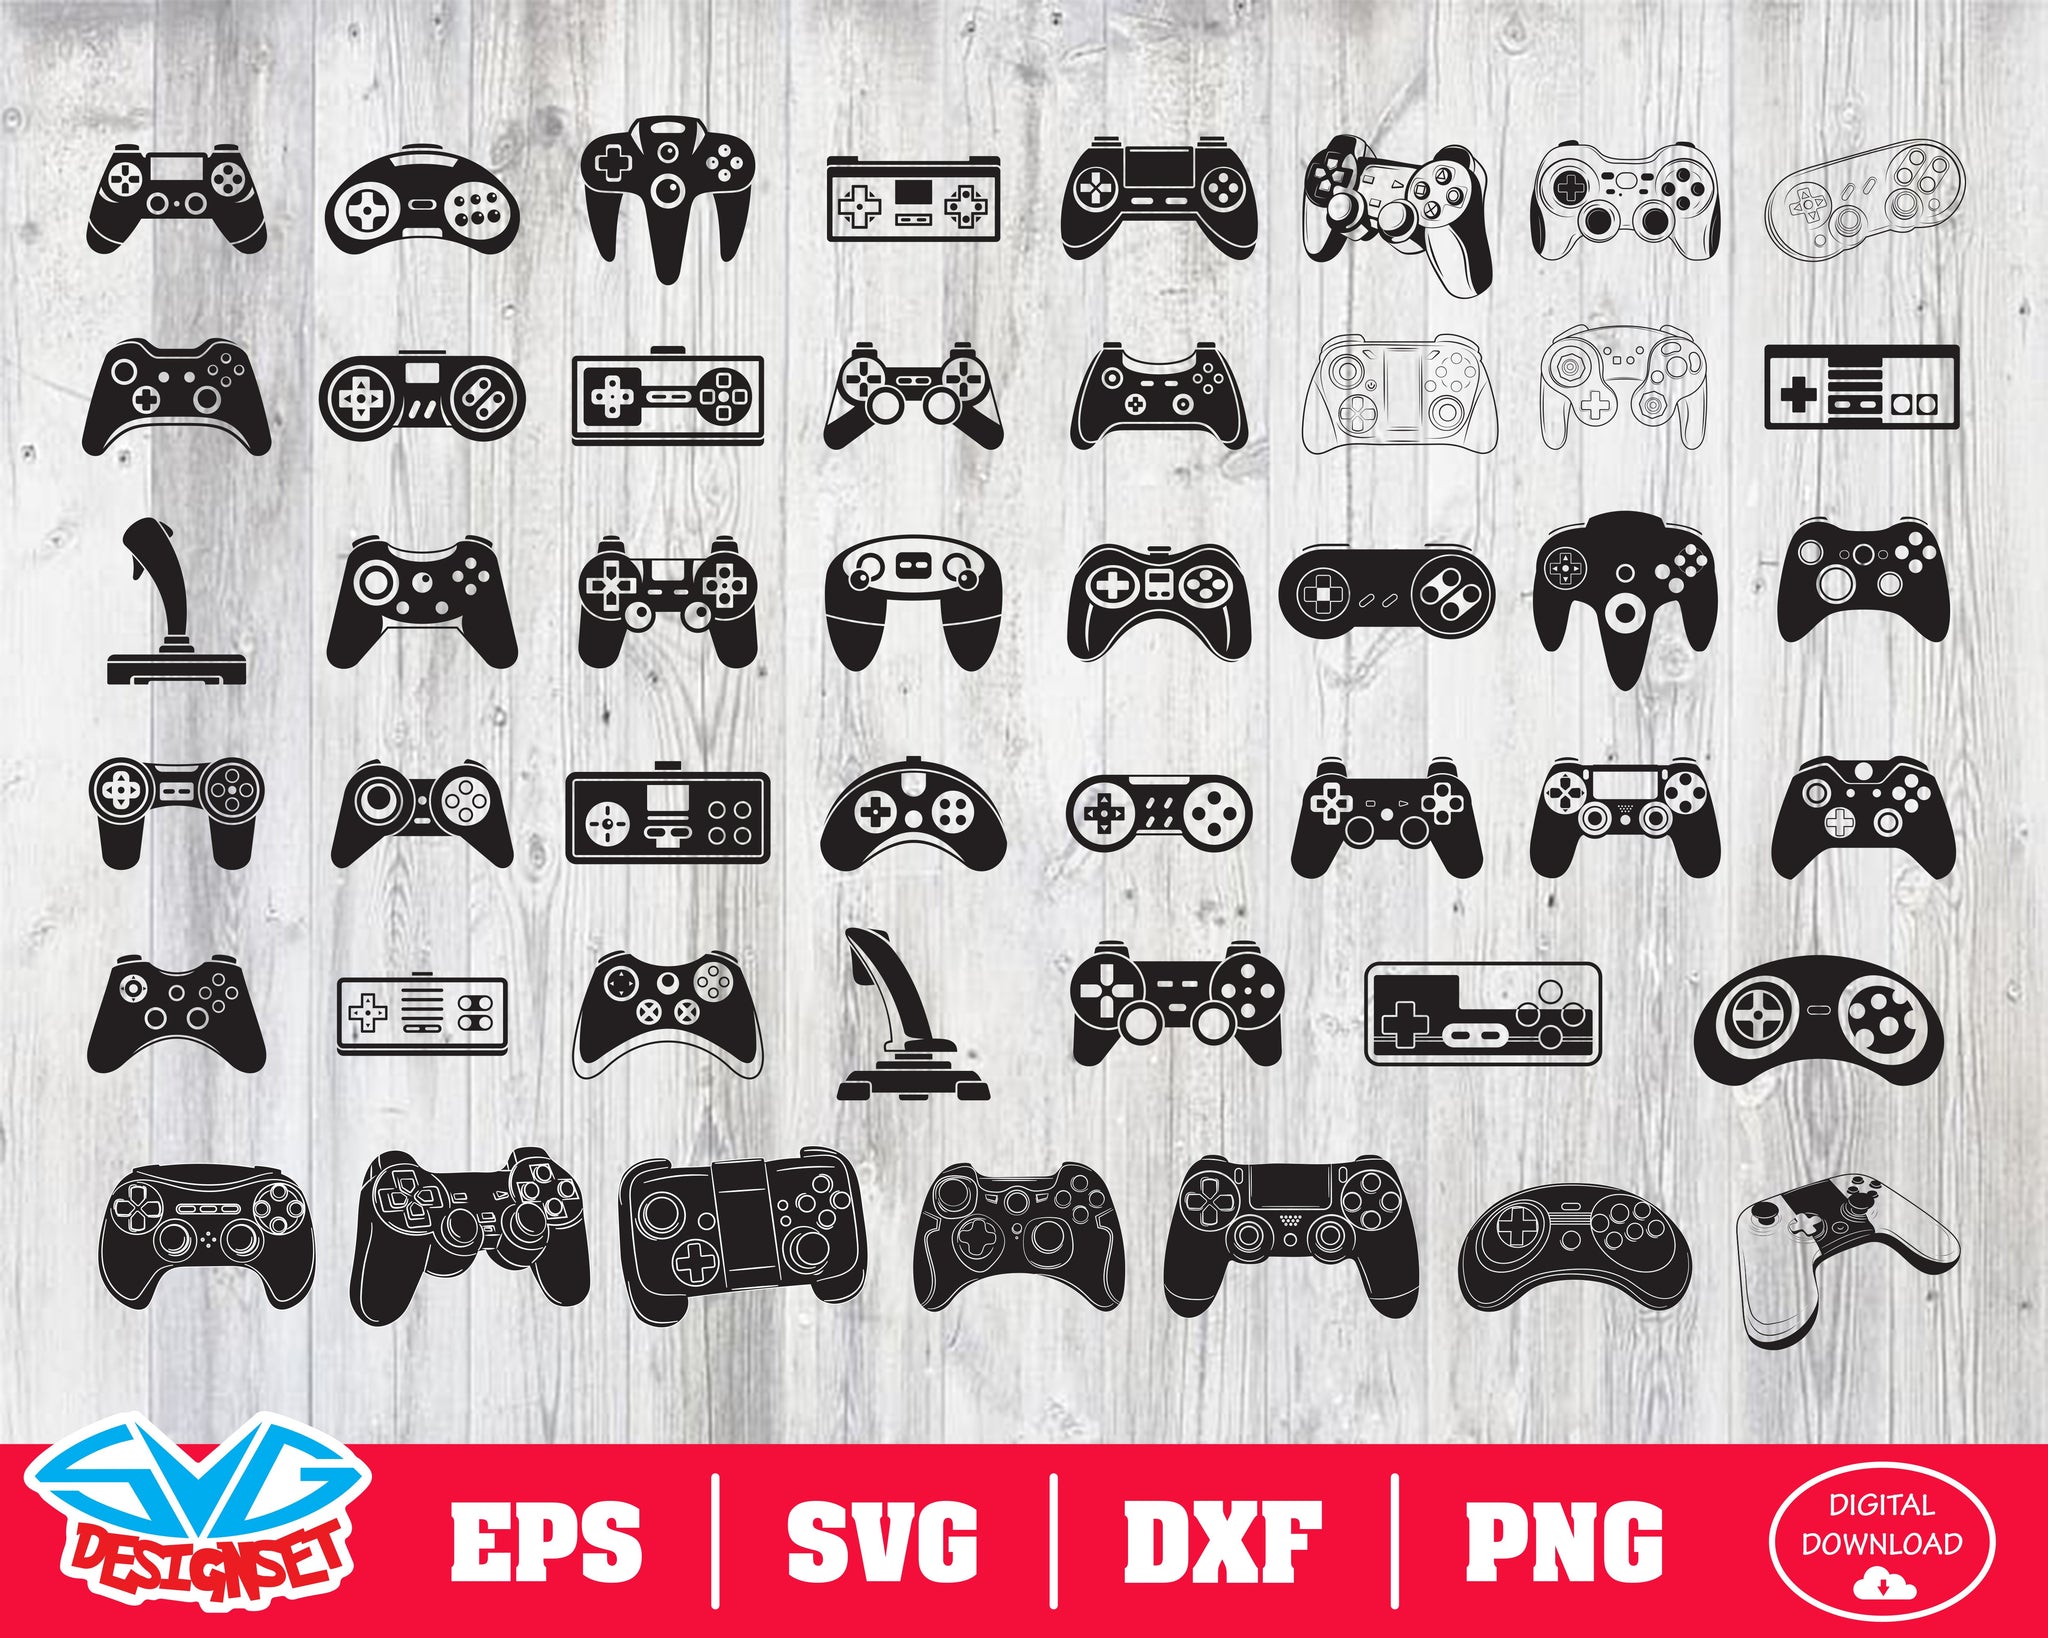 Joystick game Svg, Dxf, Eps, Png, Clipart, Silhouette and Cutfiles - SVGDesignSets